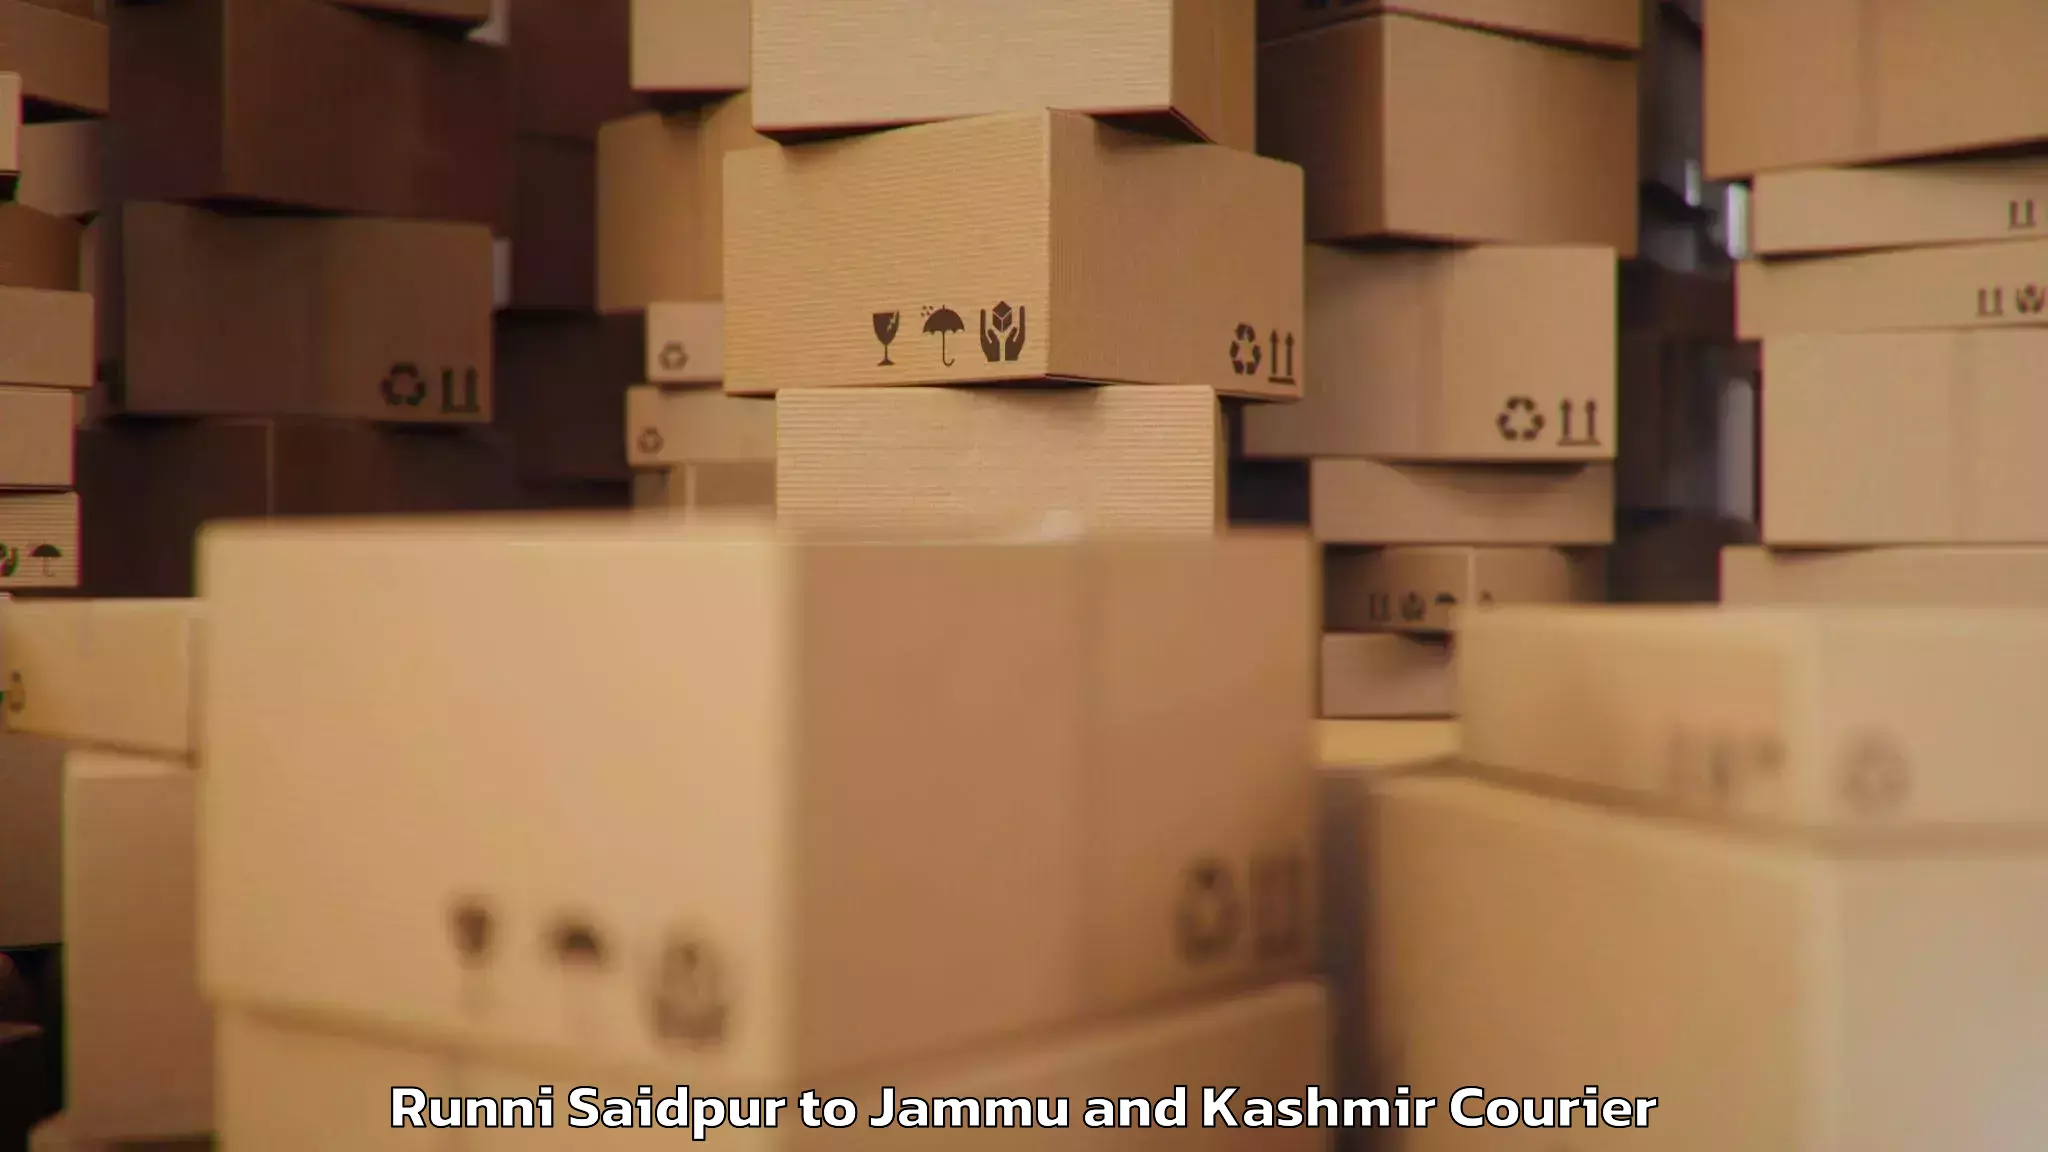 Personal effects shipping in Runni Saidpur to University of Jammu